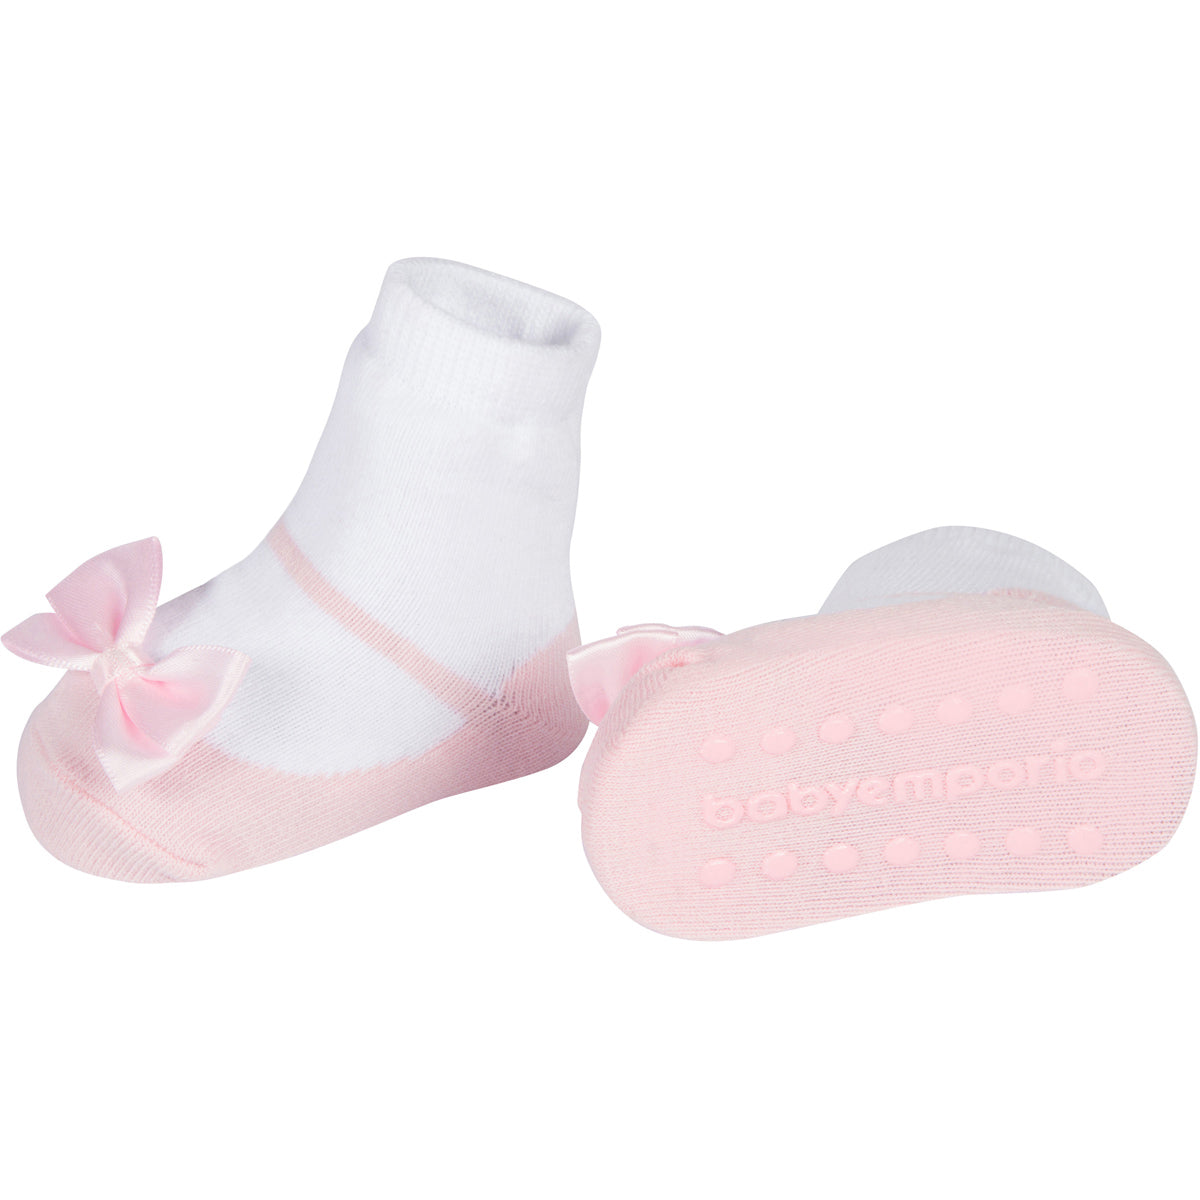 Baby Emporio infant girl baby socks with nearly invisible anti-slip soles matching the socks light pink sole color